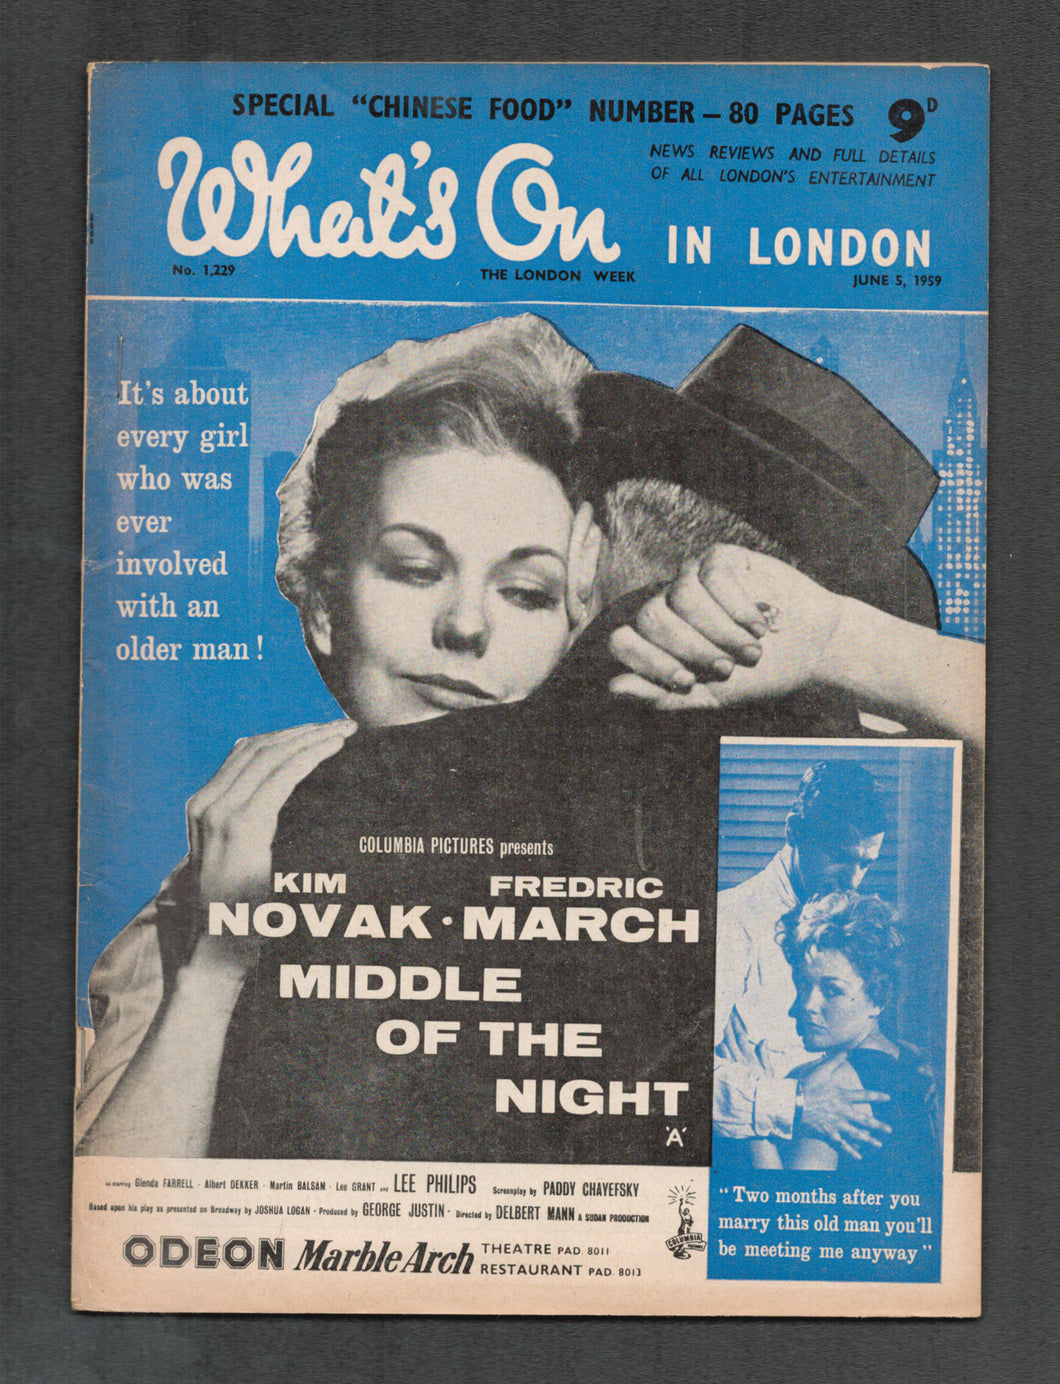 Whats On No 1229 June 5 1959